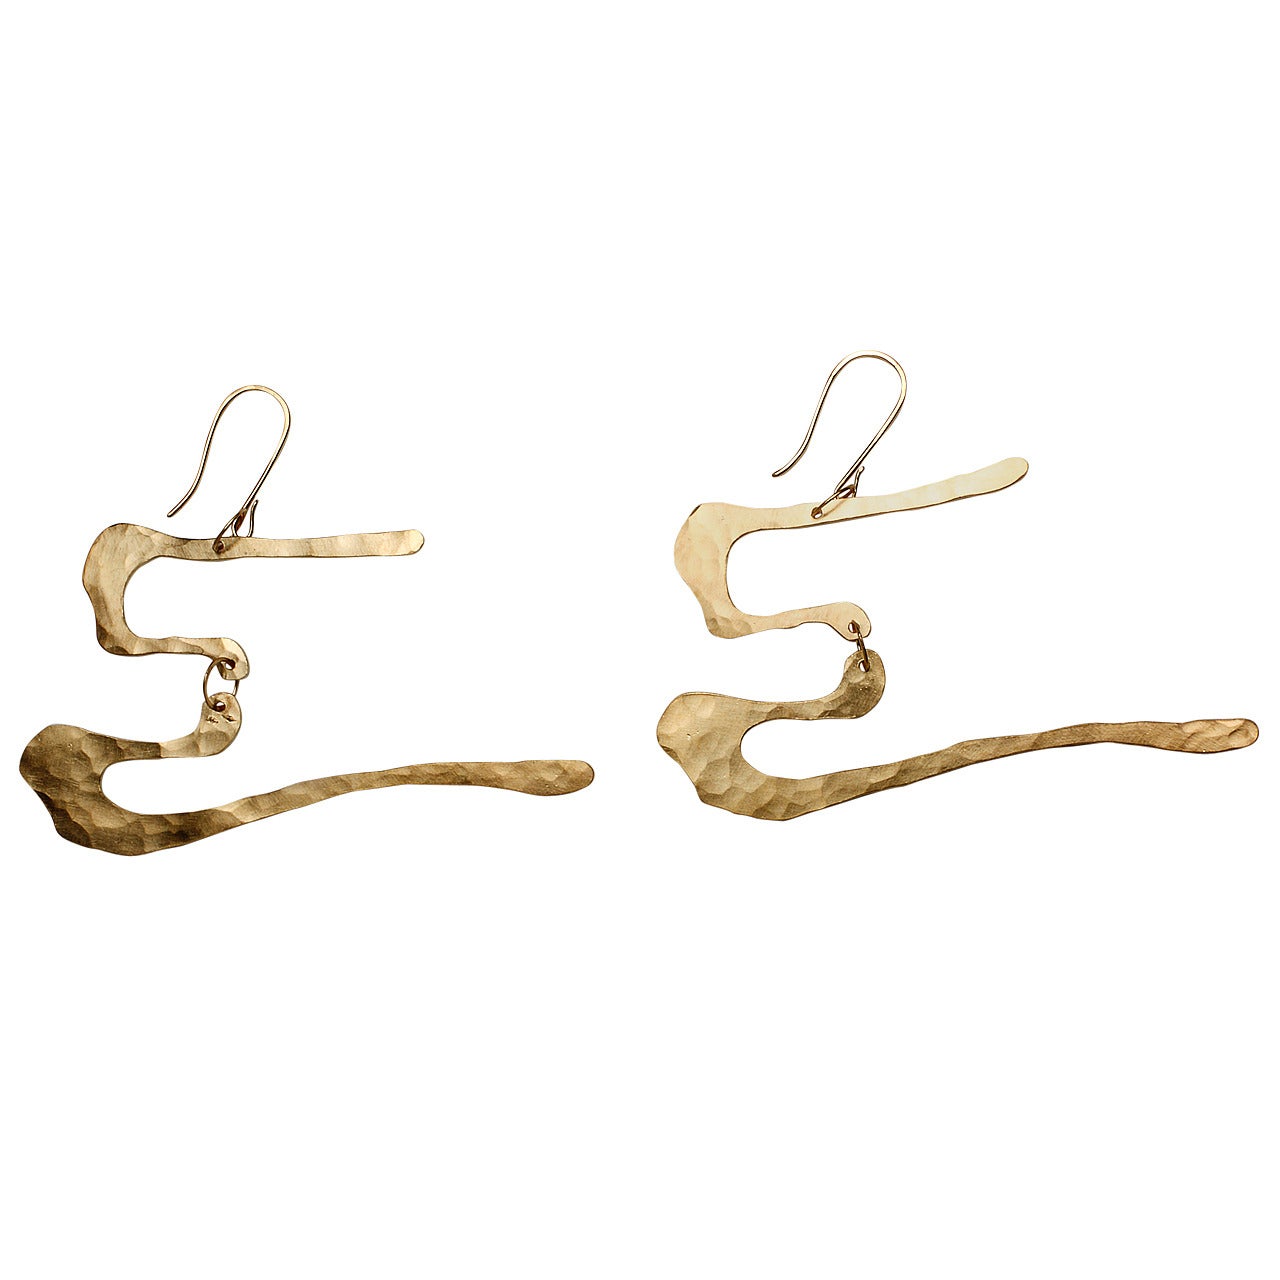 Gold Mobile Earrings by Jacques Jarrige, 2014